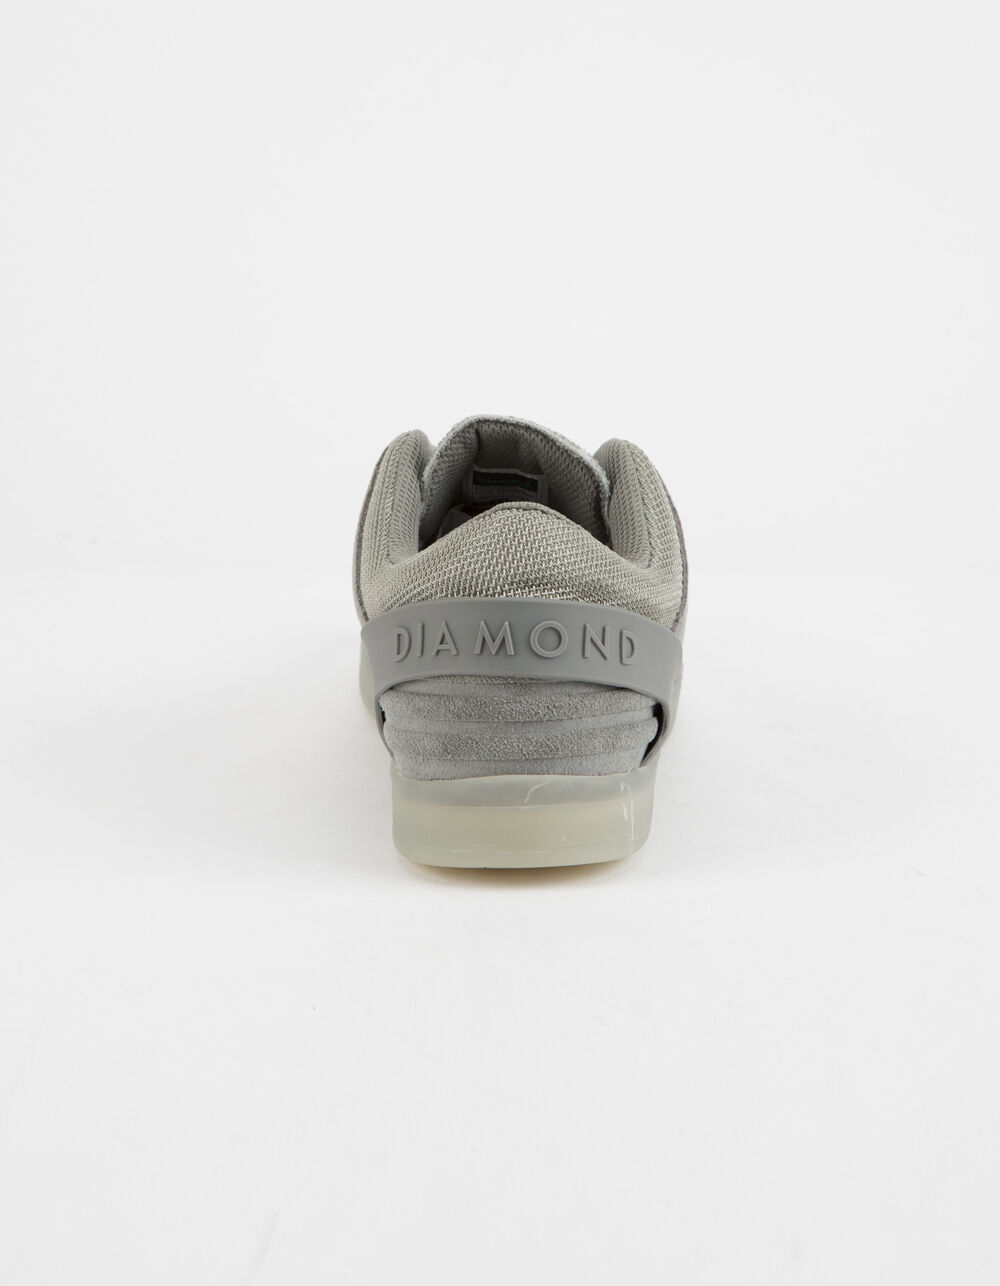 DIAMOND SUPPLY CO. Graphite Mens Shoes image number 4